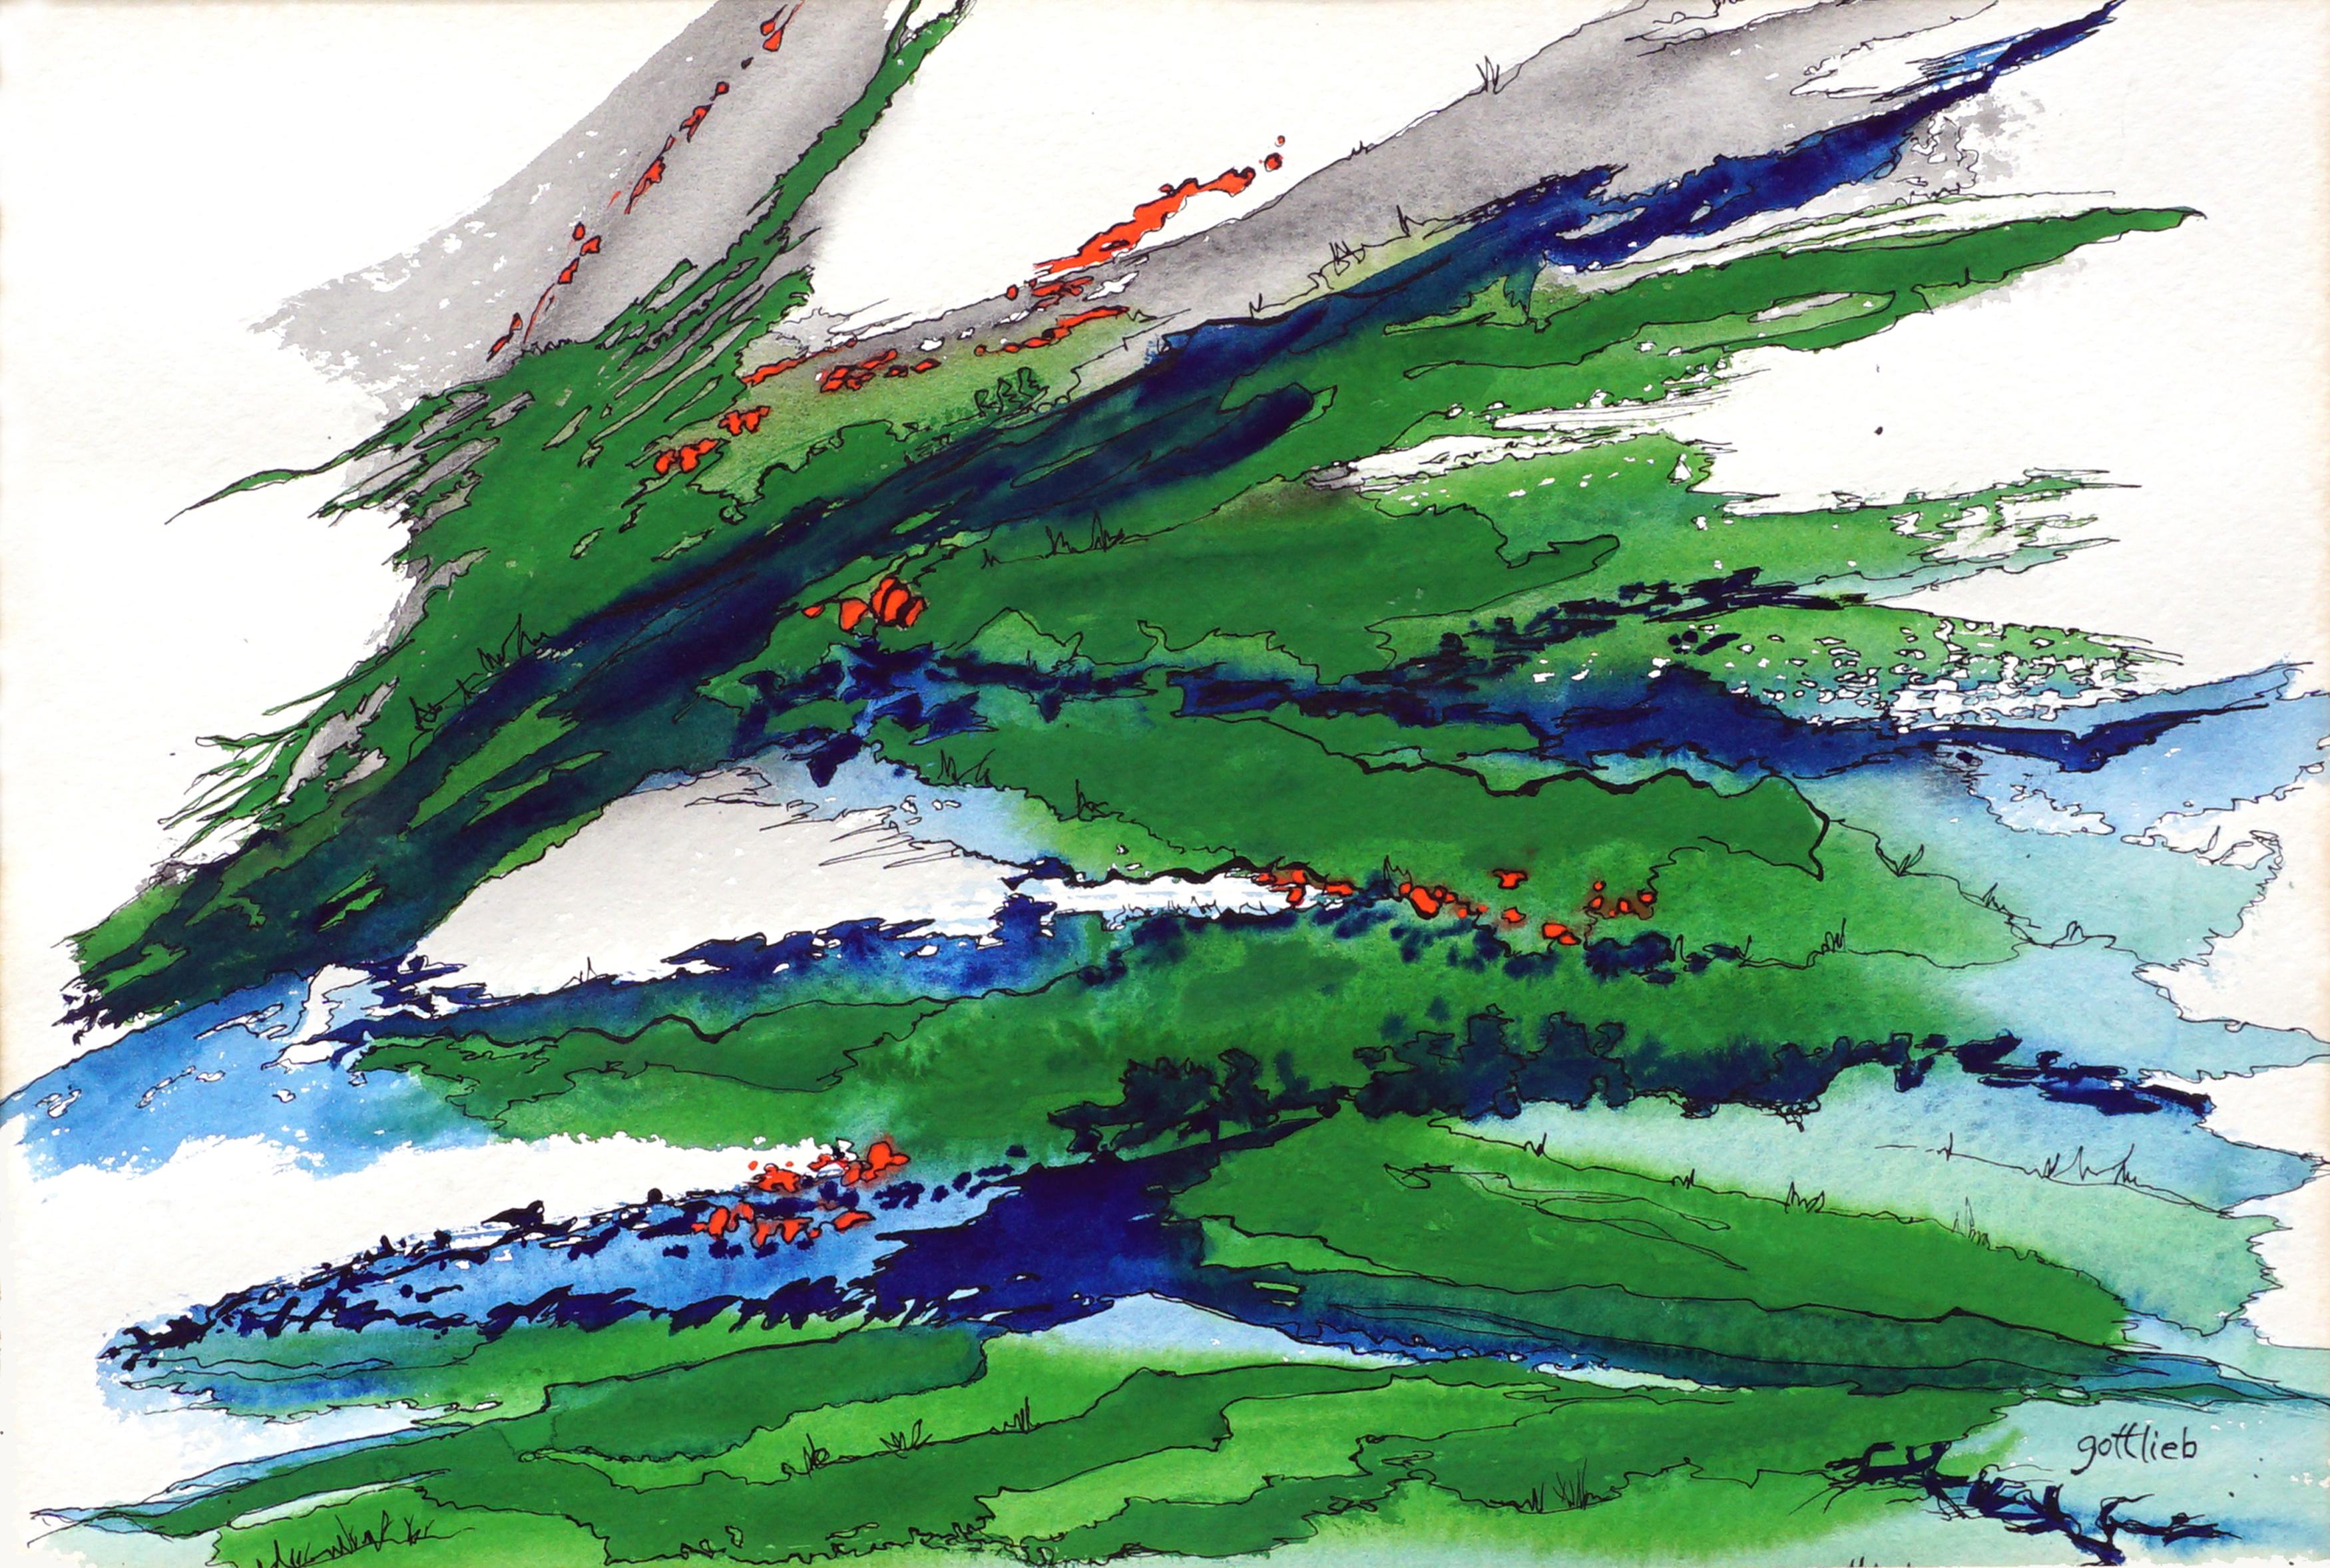 Green and Blue Feathers Abstract - Painting by Gottlieb